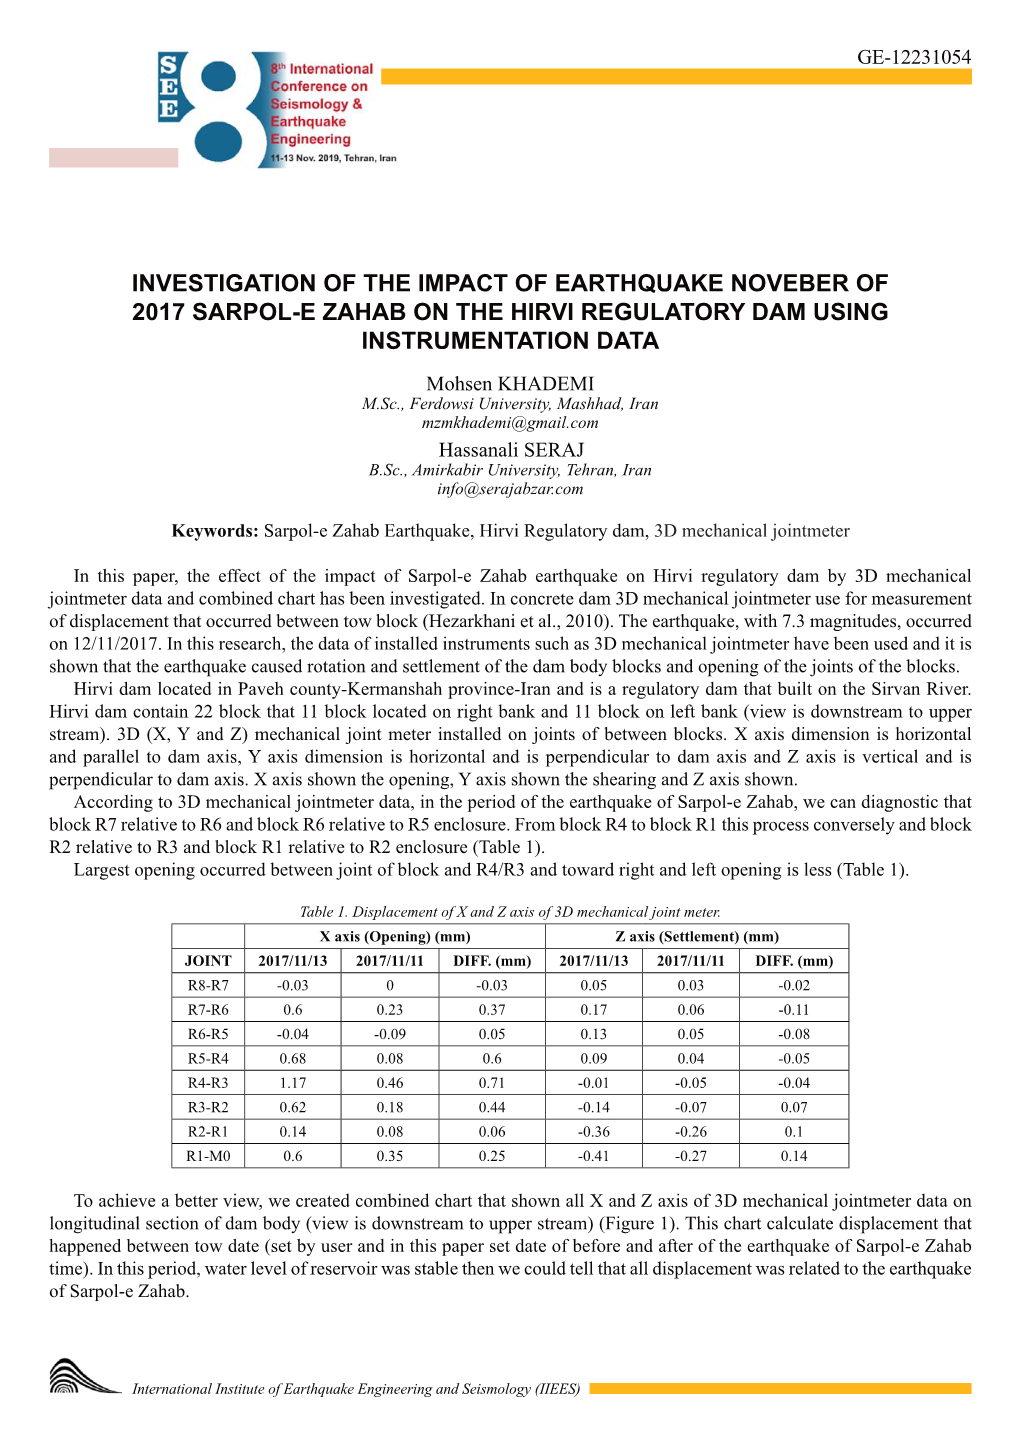 Investigation of the Impact of Earthquake Noveber of 2017